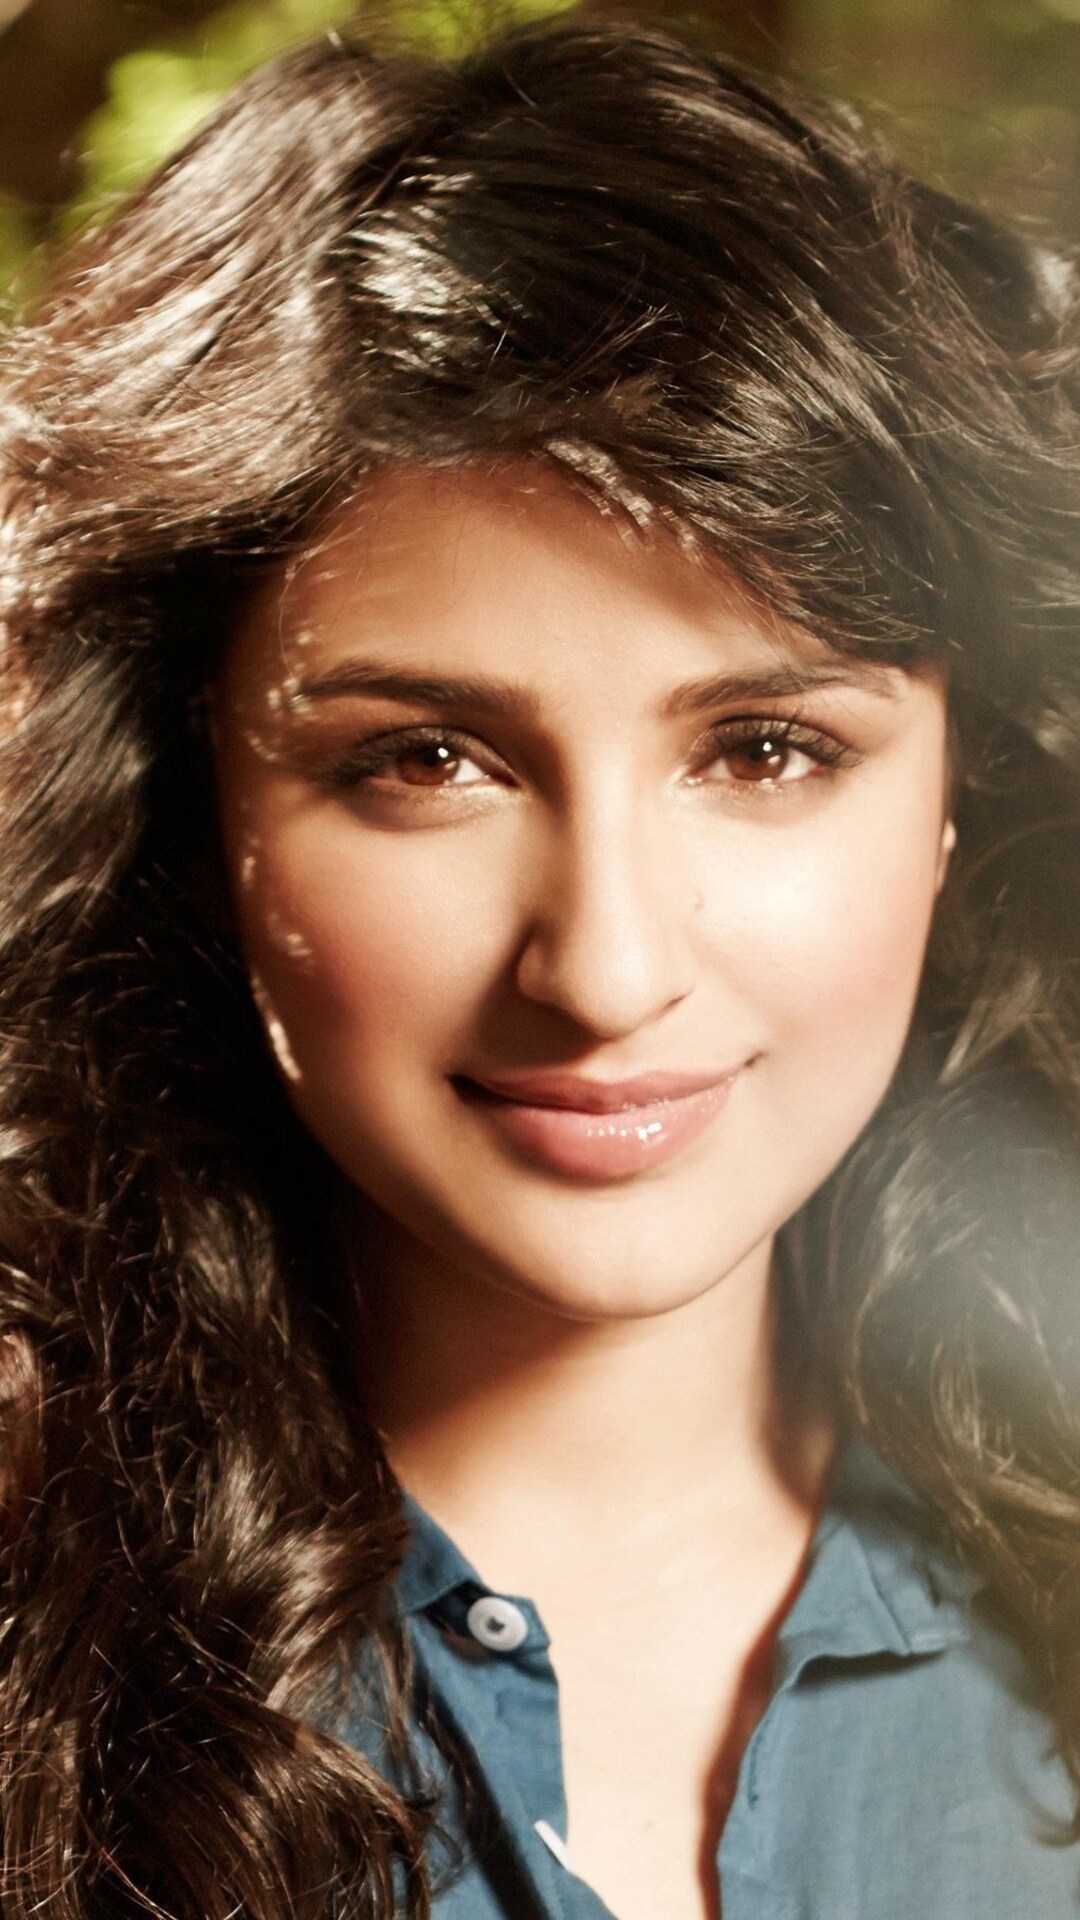 1080x1920 2016 Parineeti Chopra Iphone 7,6s,6 Plus, Pixel xl ,One Plus  3,3t,5 HD 4k Wallpapers, Images, Backgrounds, Photos and Pictures